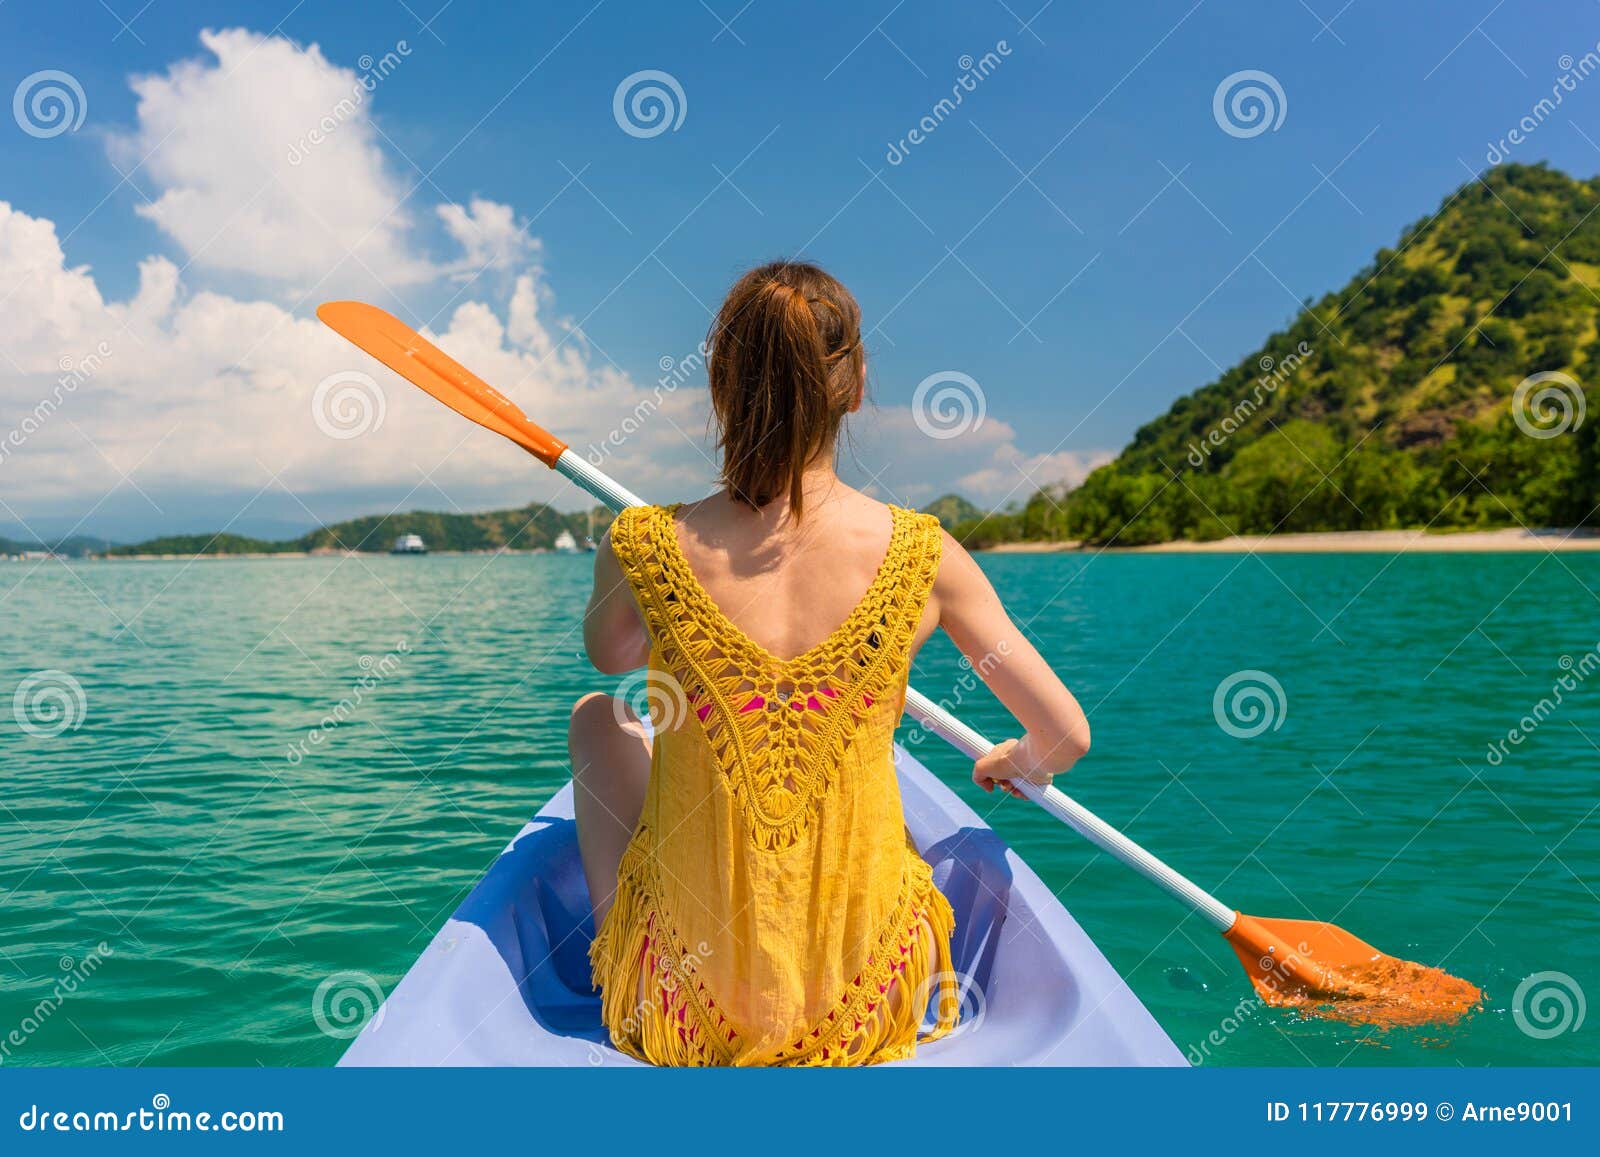 young woman paddling a canoe during vacation in flores island